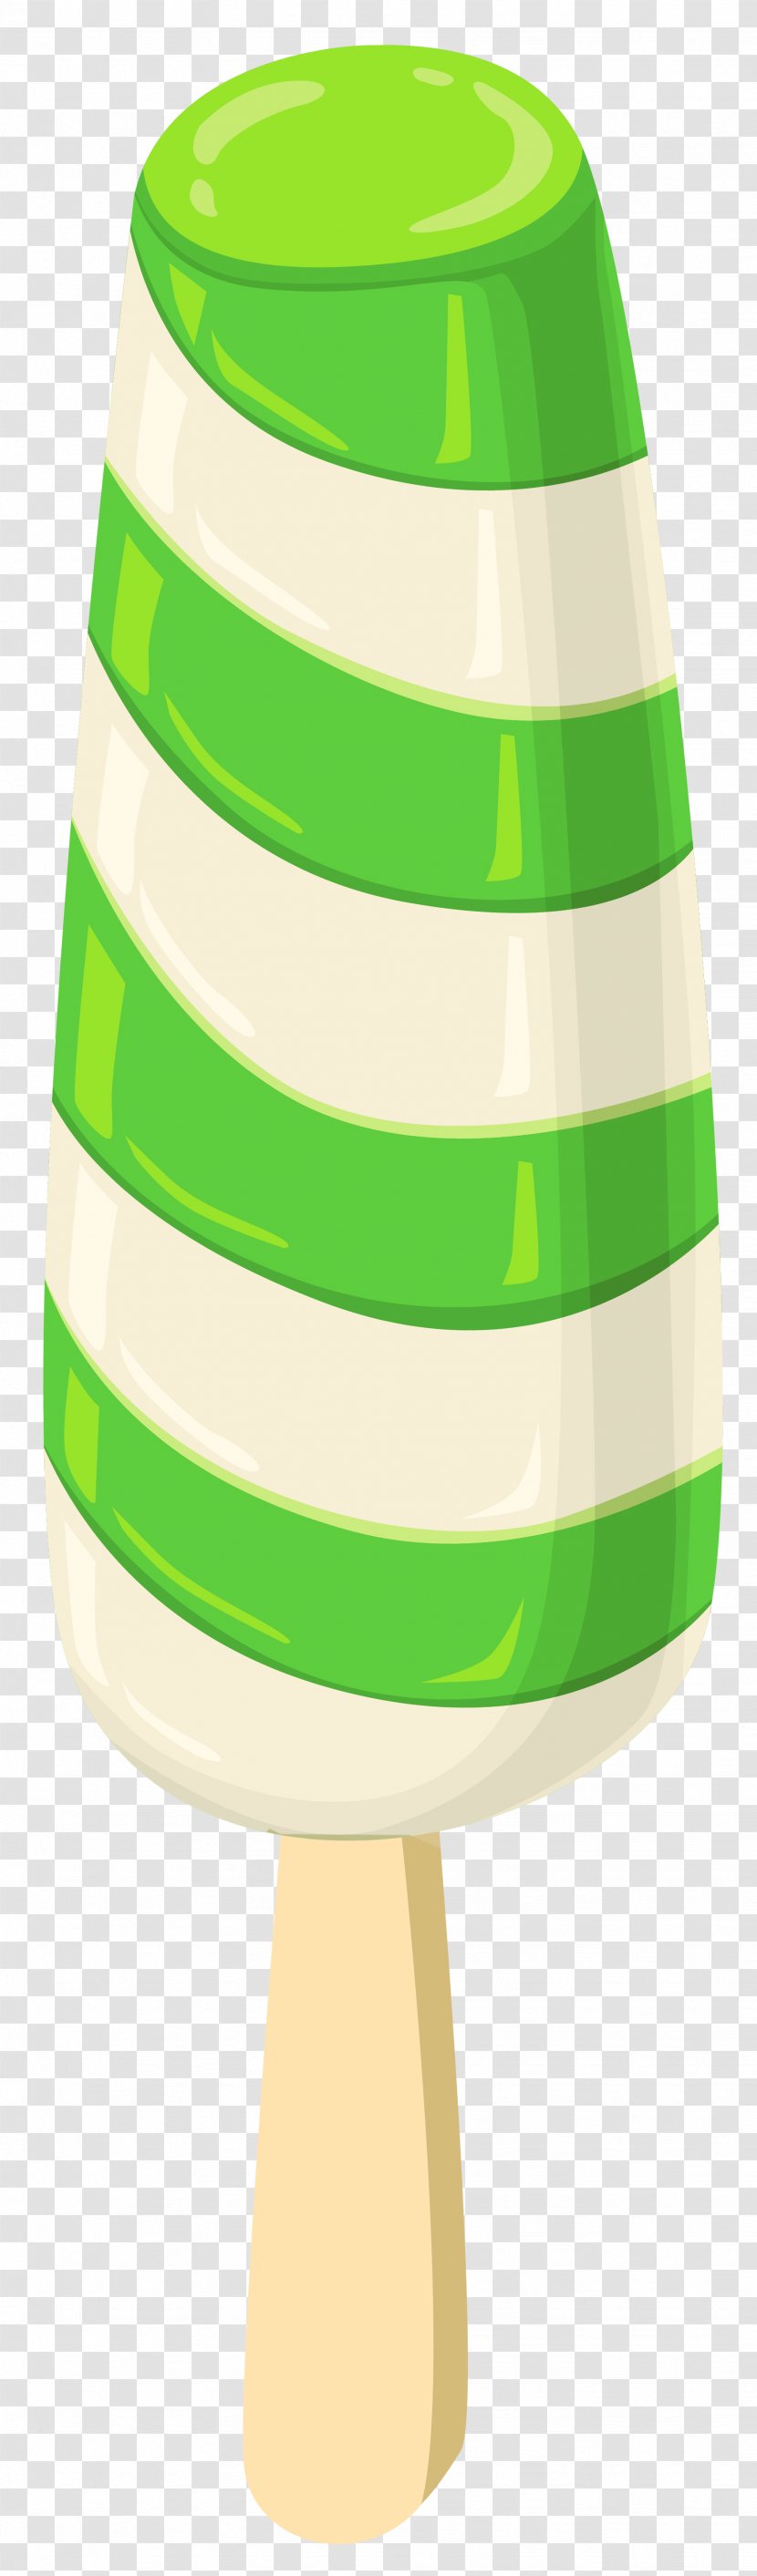 Green Lighting - Yellow - And White Ice Cream Clipart Image Transparent PNG